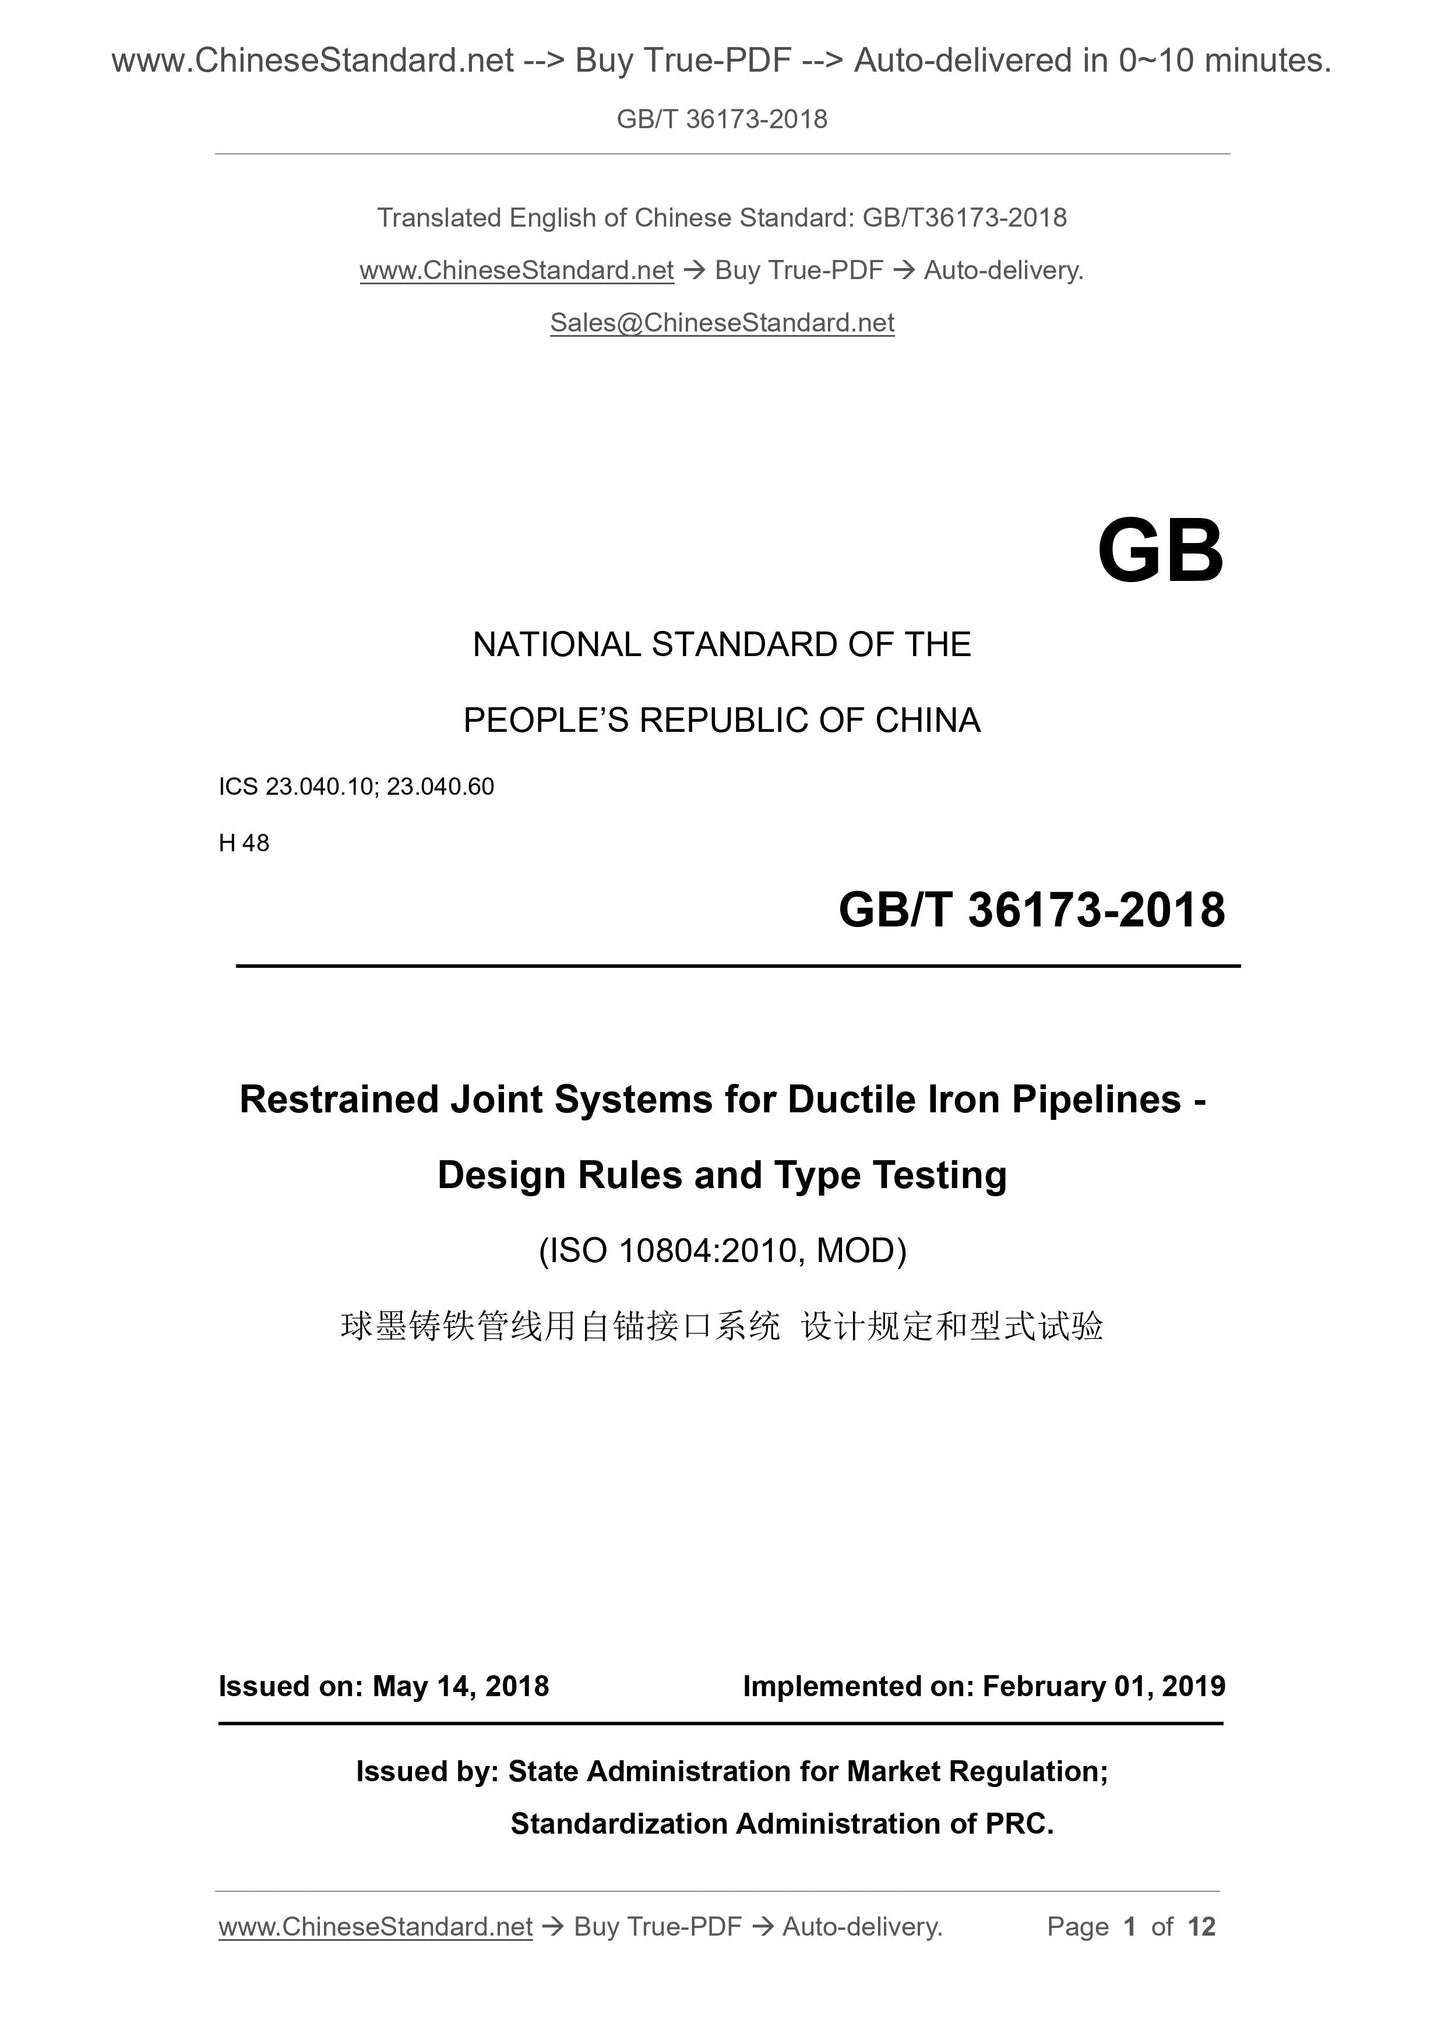 GB/T 36173-2018 Page 1